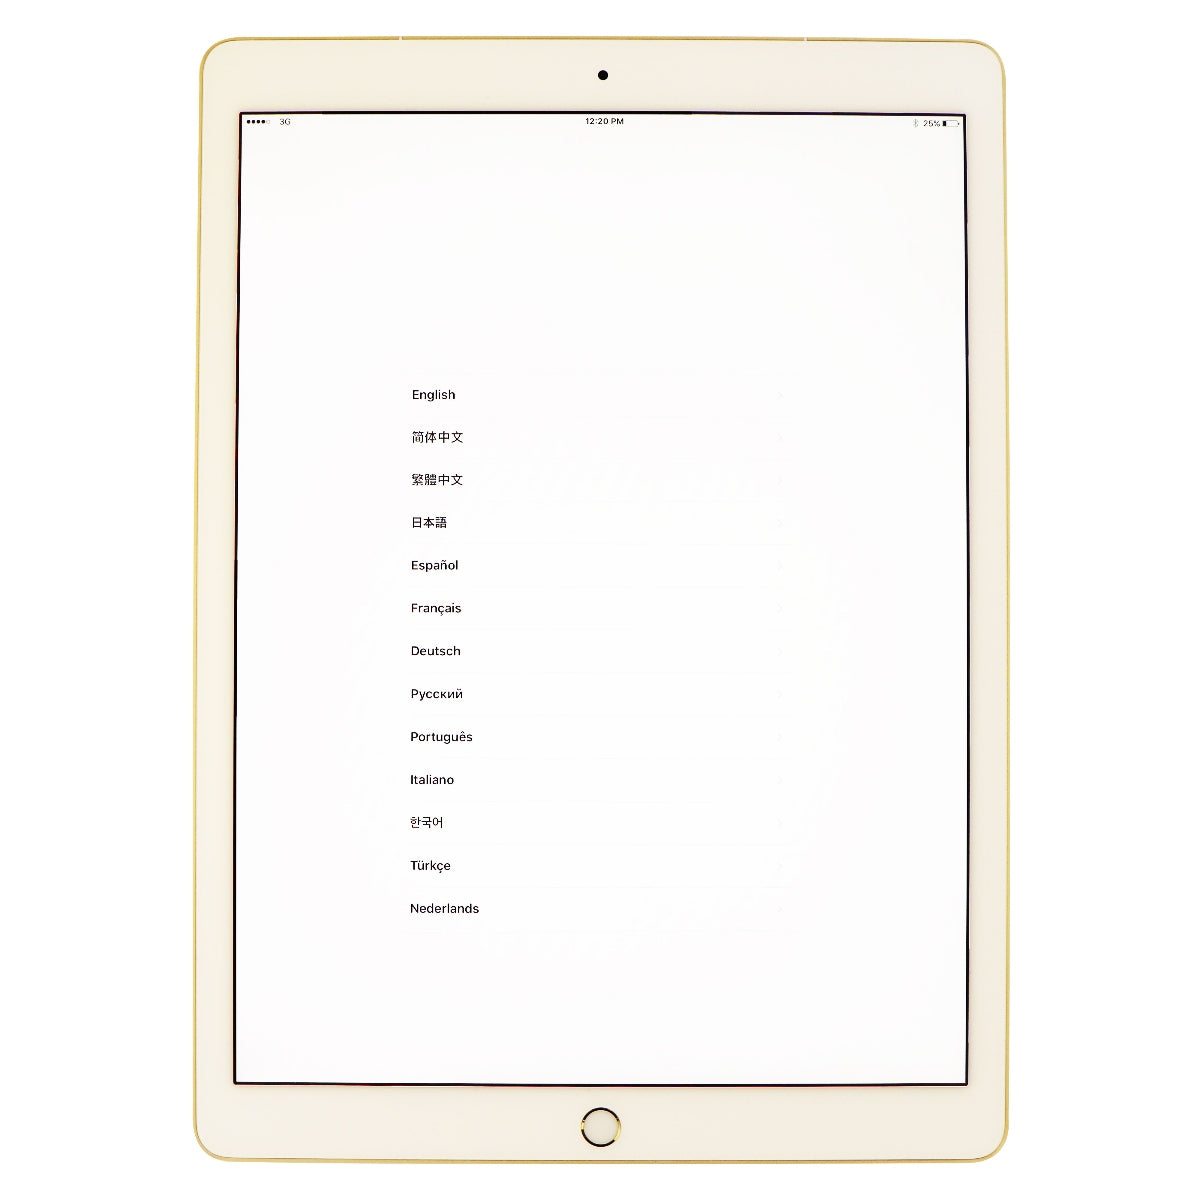 Apple iPad Pro 12.9-inch (2nd Gen) Tablet (A1671) Unlocked - 64GB / Gold iPads, Tablets & eBook Readers Apple    - Simple Cell Bulk Wholesale Pricing - USA Seller